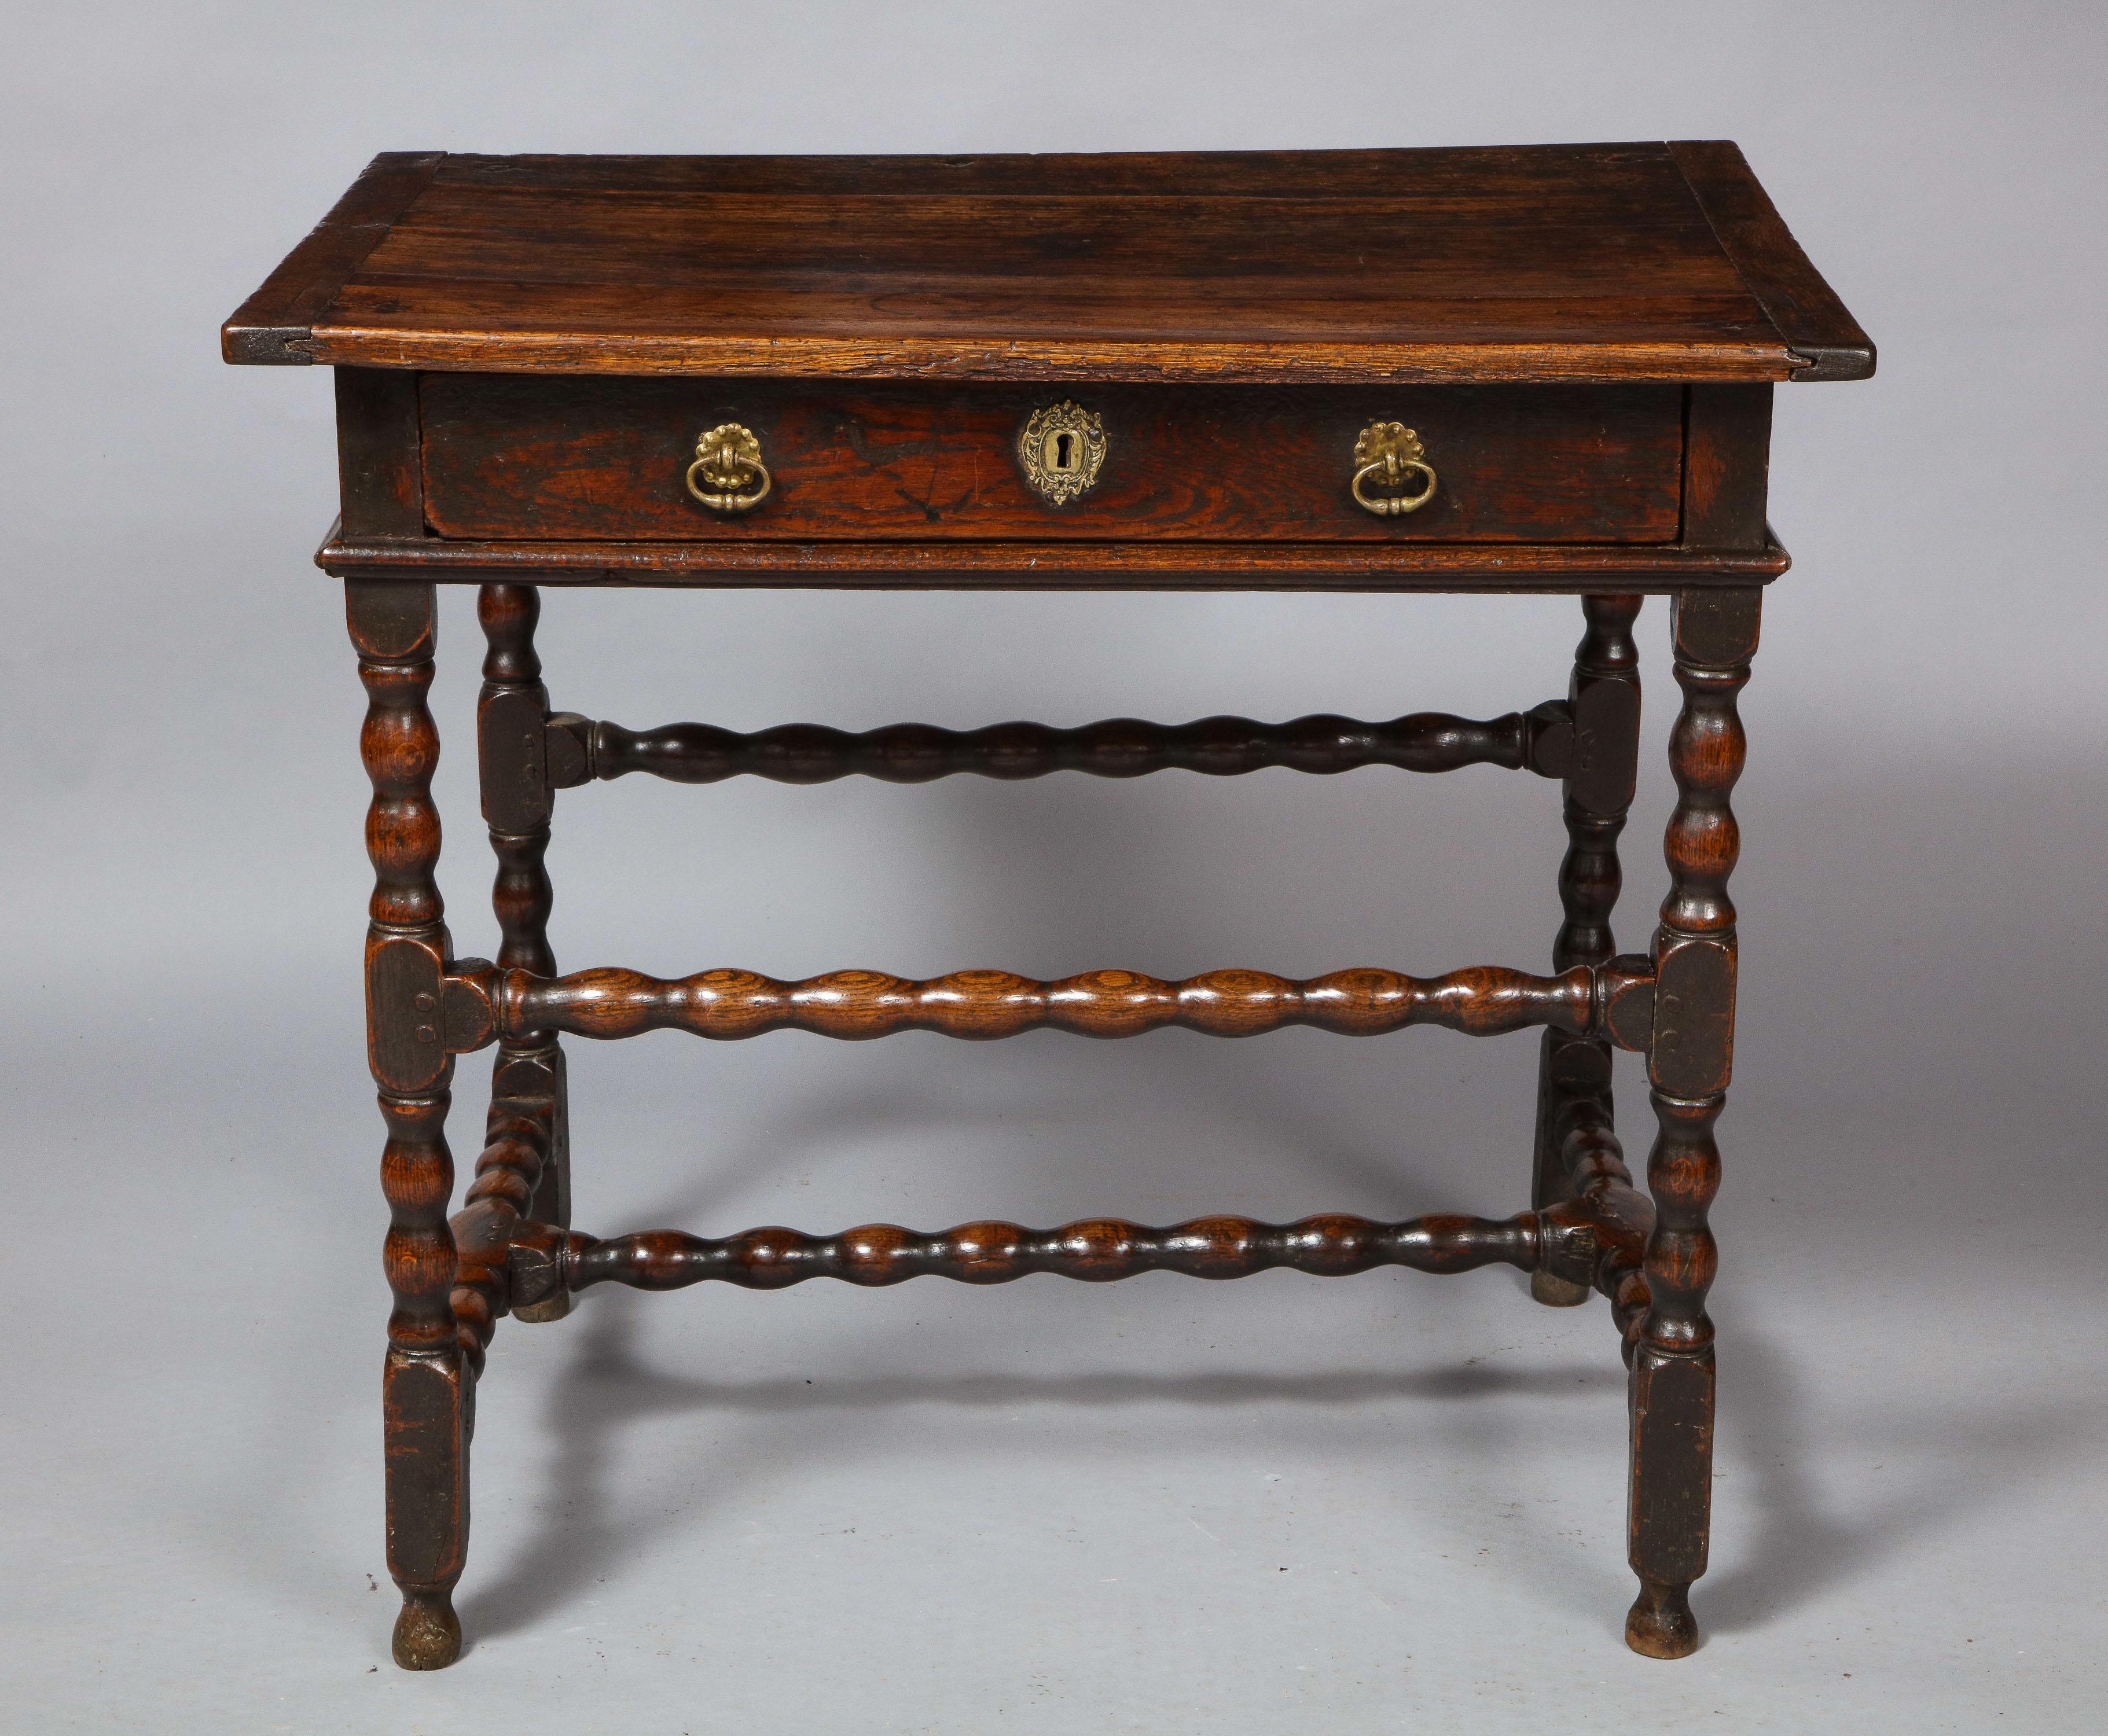 Fine Charles II period oak side table, the top with breadboard ends over single drawer over molded apron, the sausage turned legs with desirable high and low cross stretchers and standing on original turned feet, the whole possessing good rich color